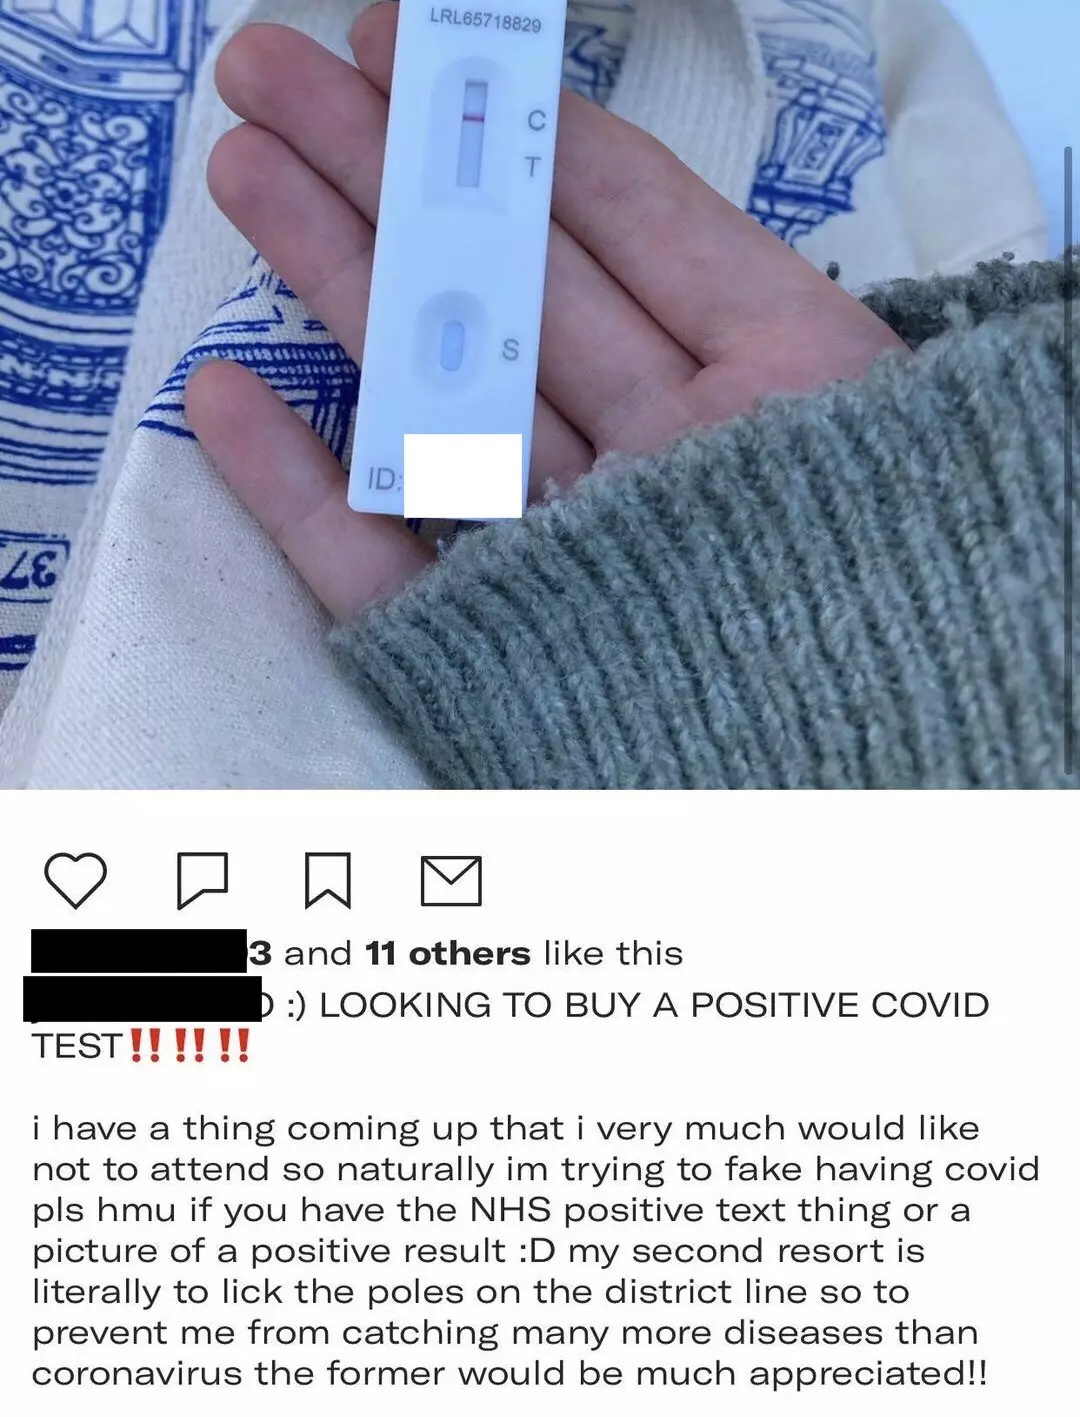 Someone has posted an ad for a positive coronavirus test on Depop (